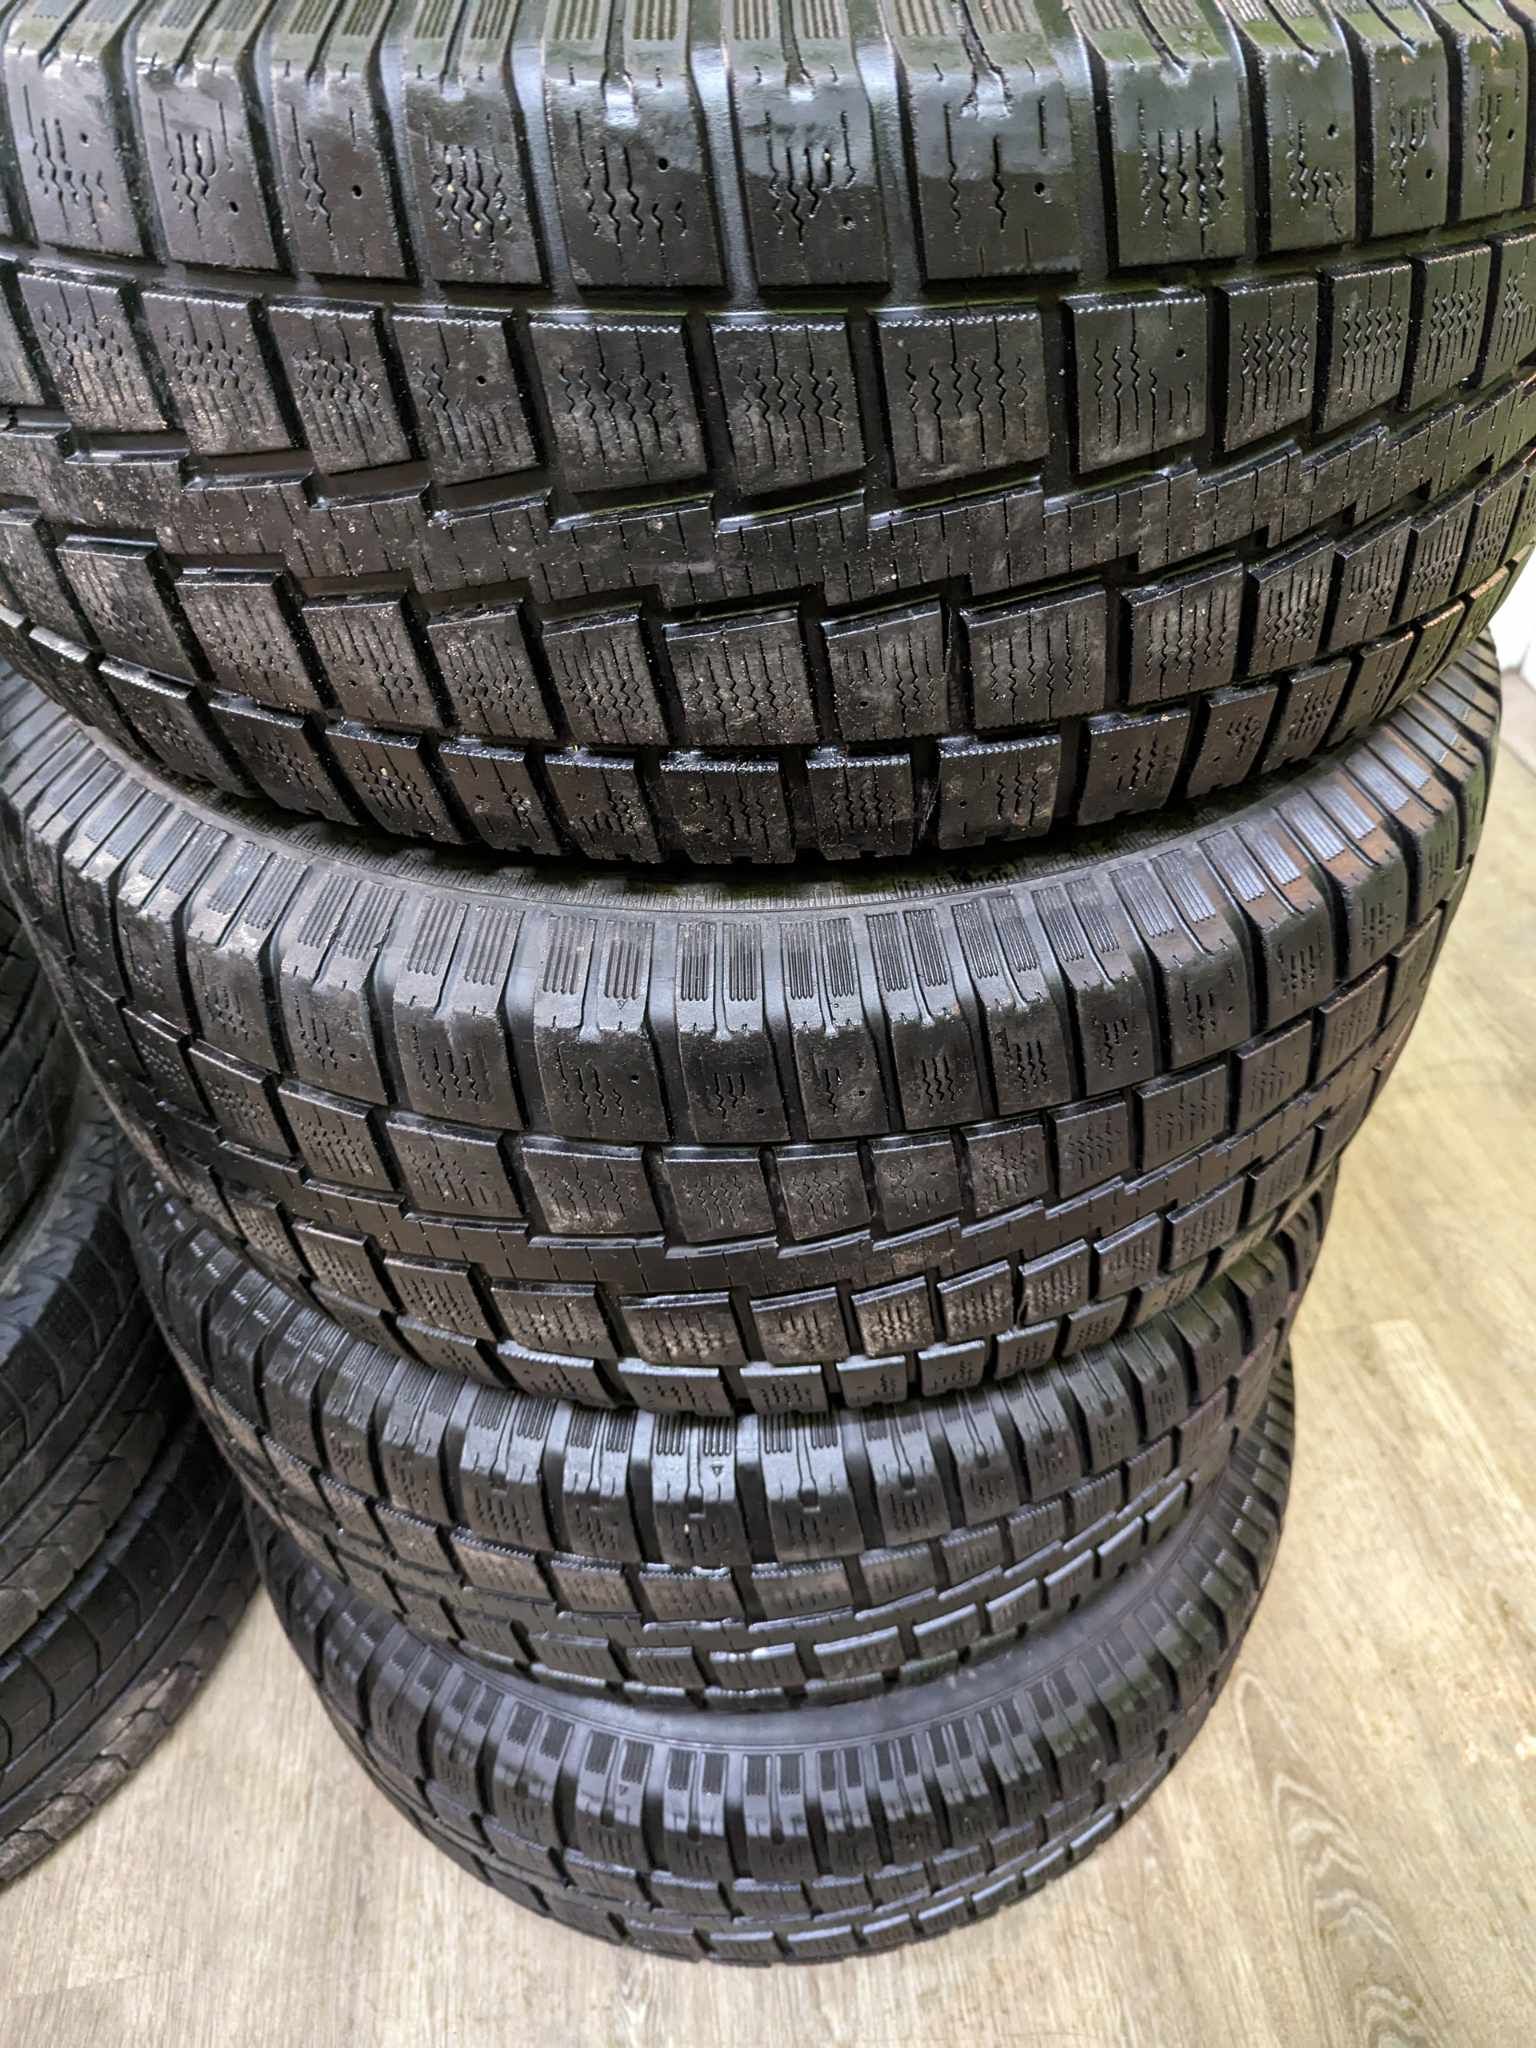 265/70R17 Cooper Snow Tires on Ford F150 Rims